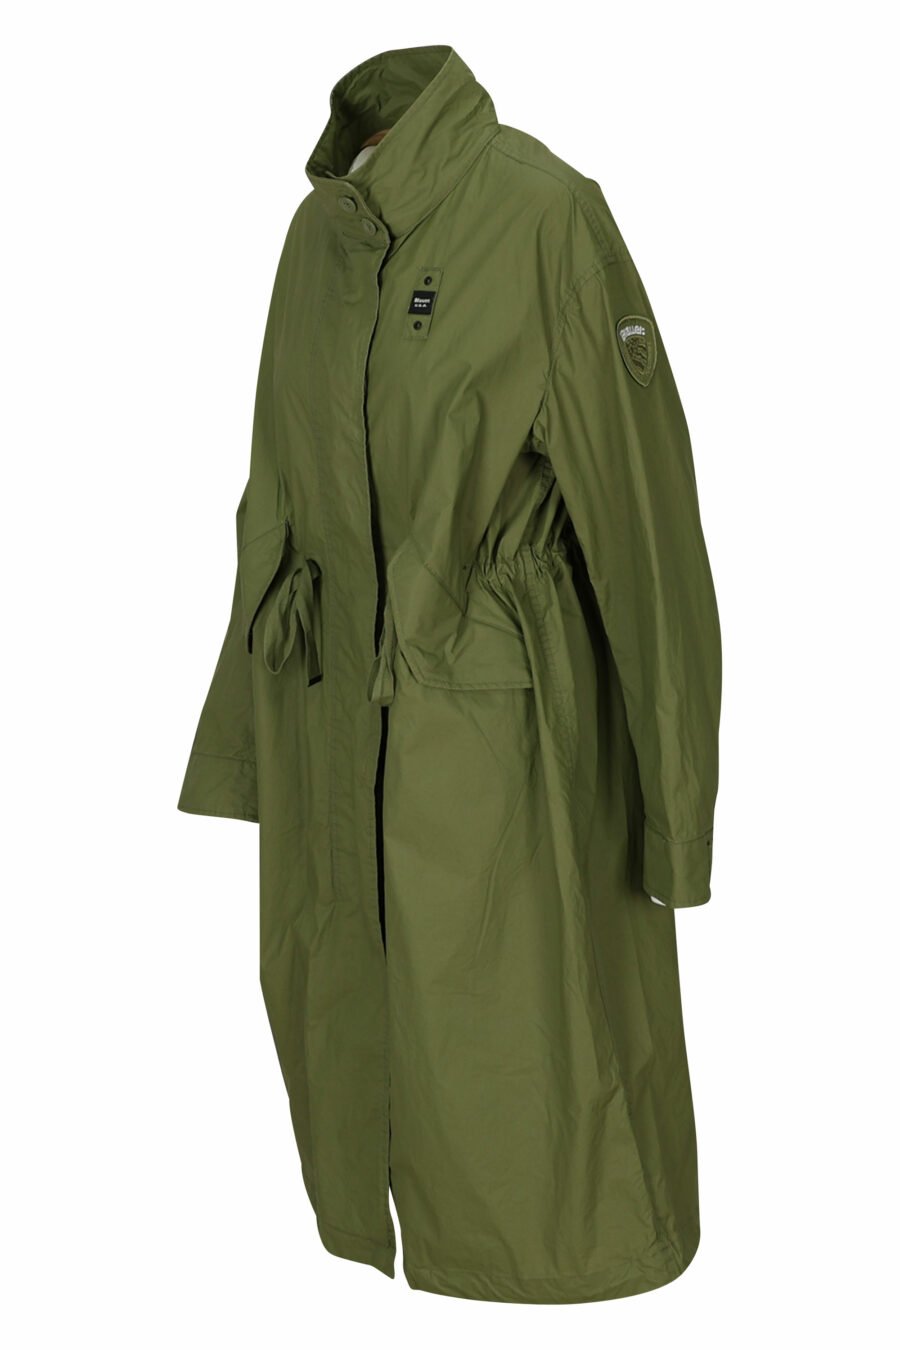 Military green waterproof trench coat with side logo - 8058610764999 1